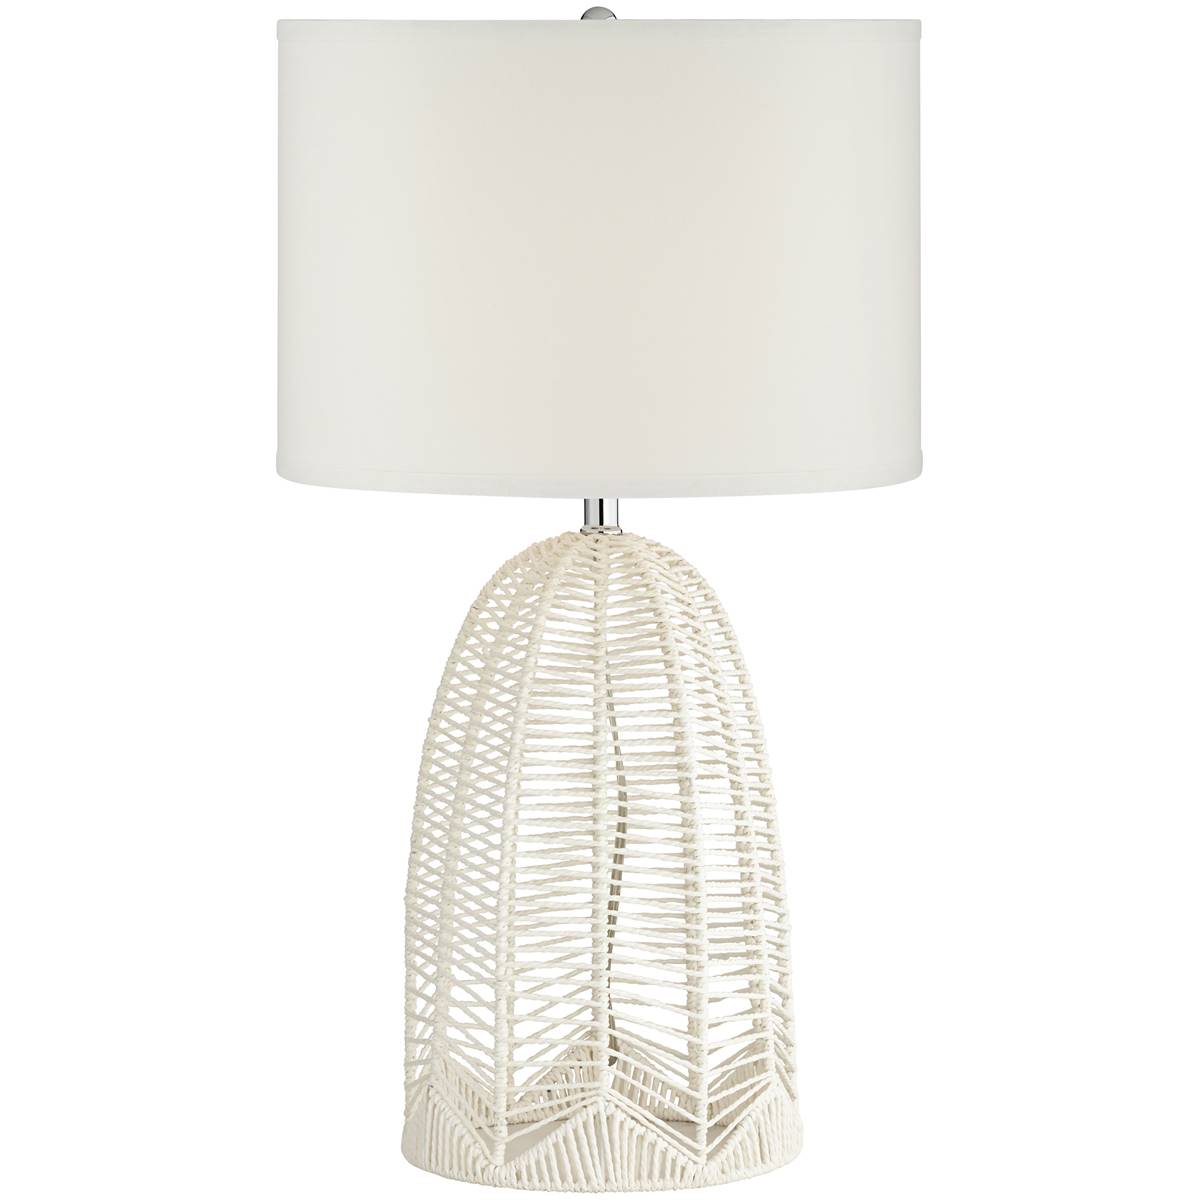 Pacific Coast Lighting Aria 30in. White Table Lamp